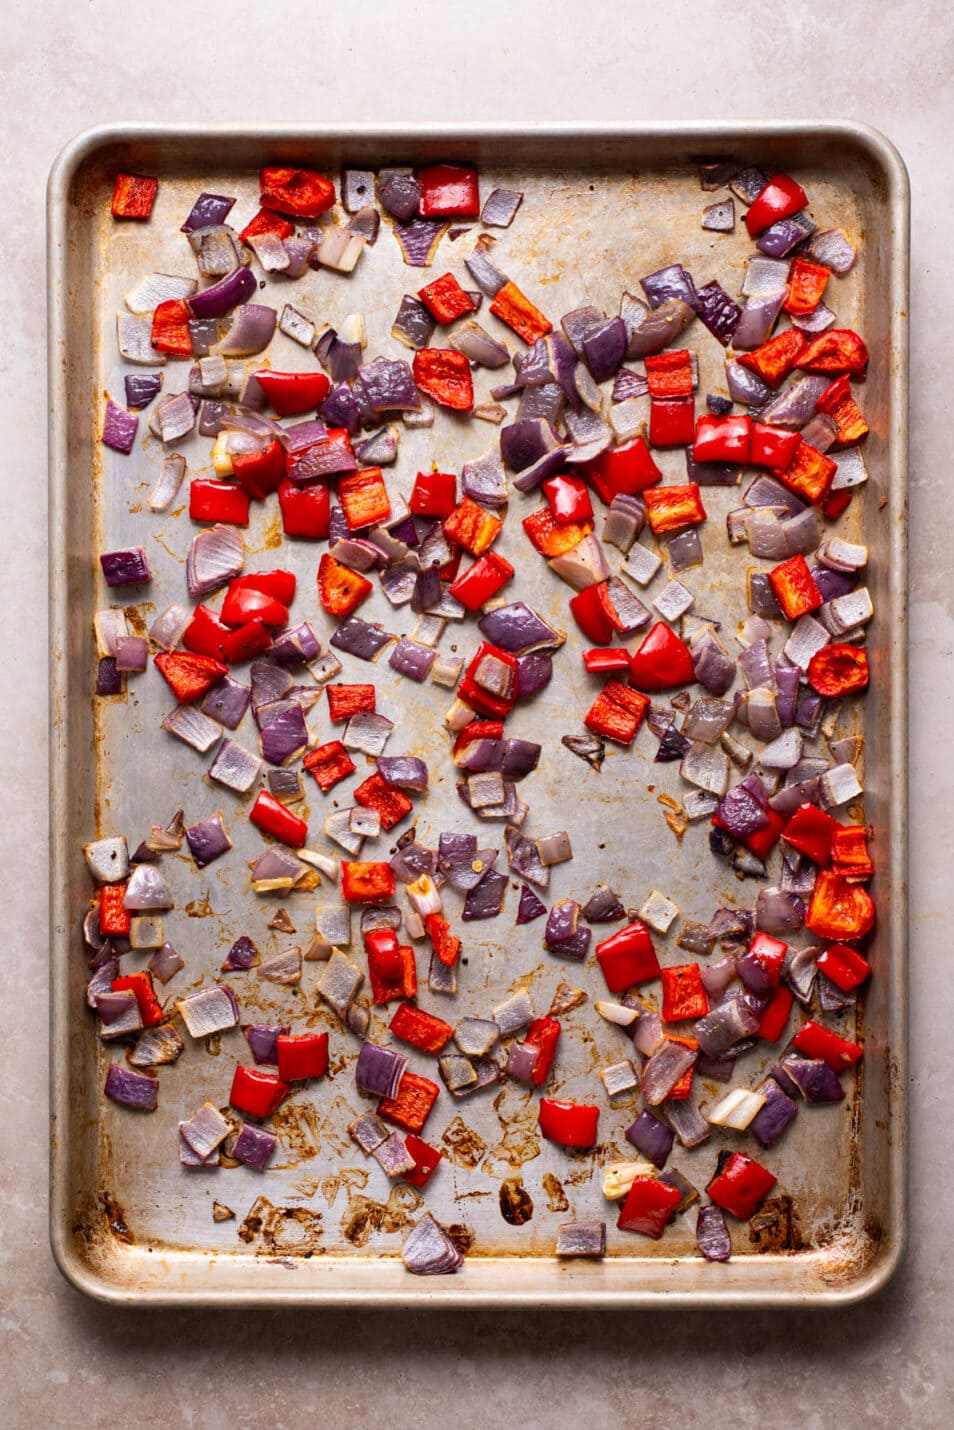 Roasted cubed red onions and bell peppers on a baking sheet.